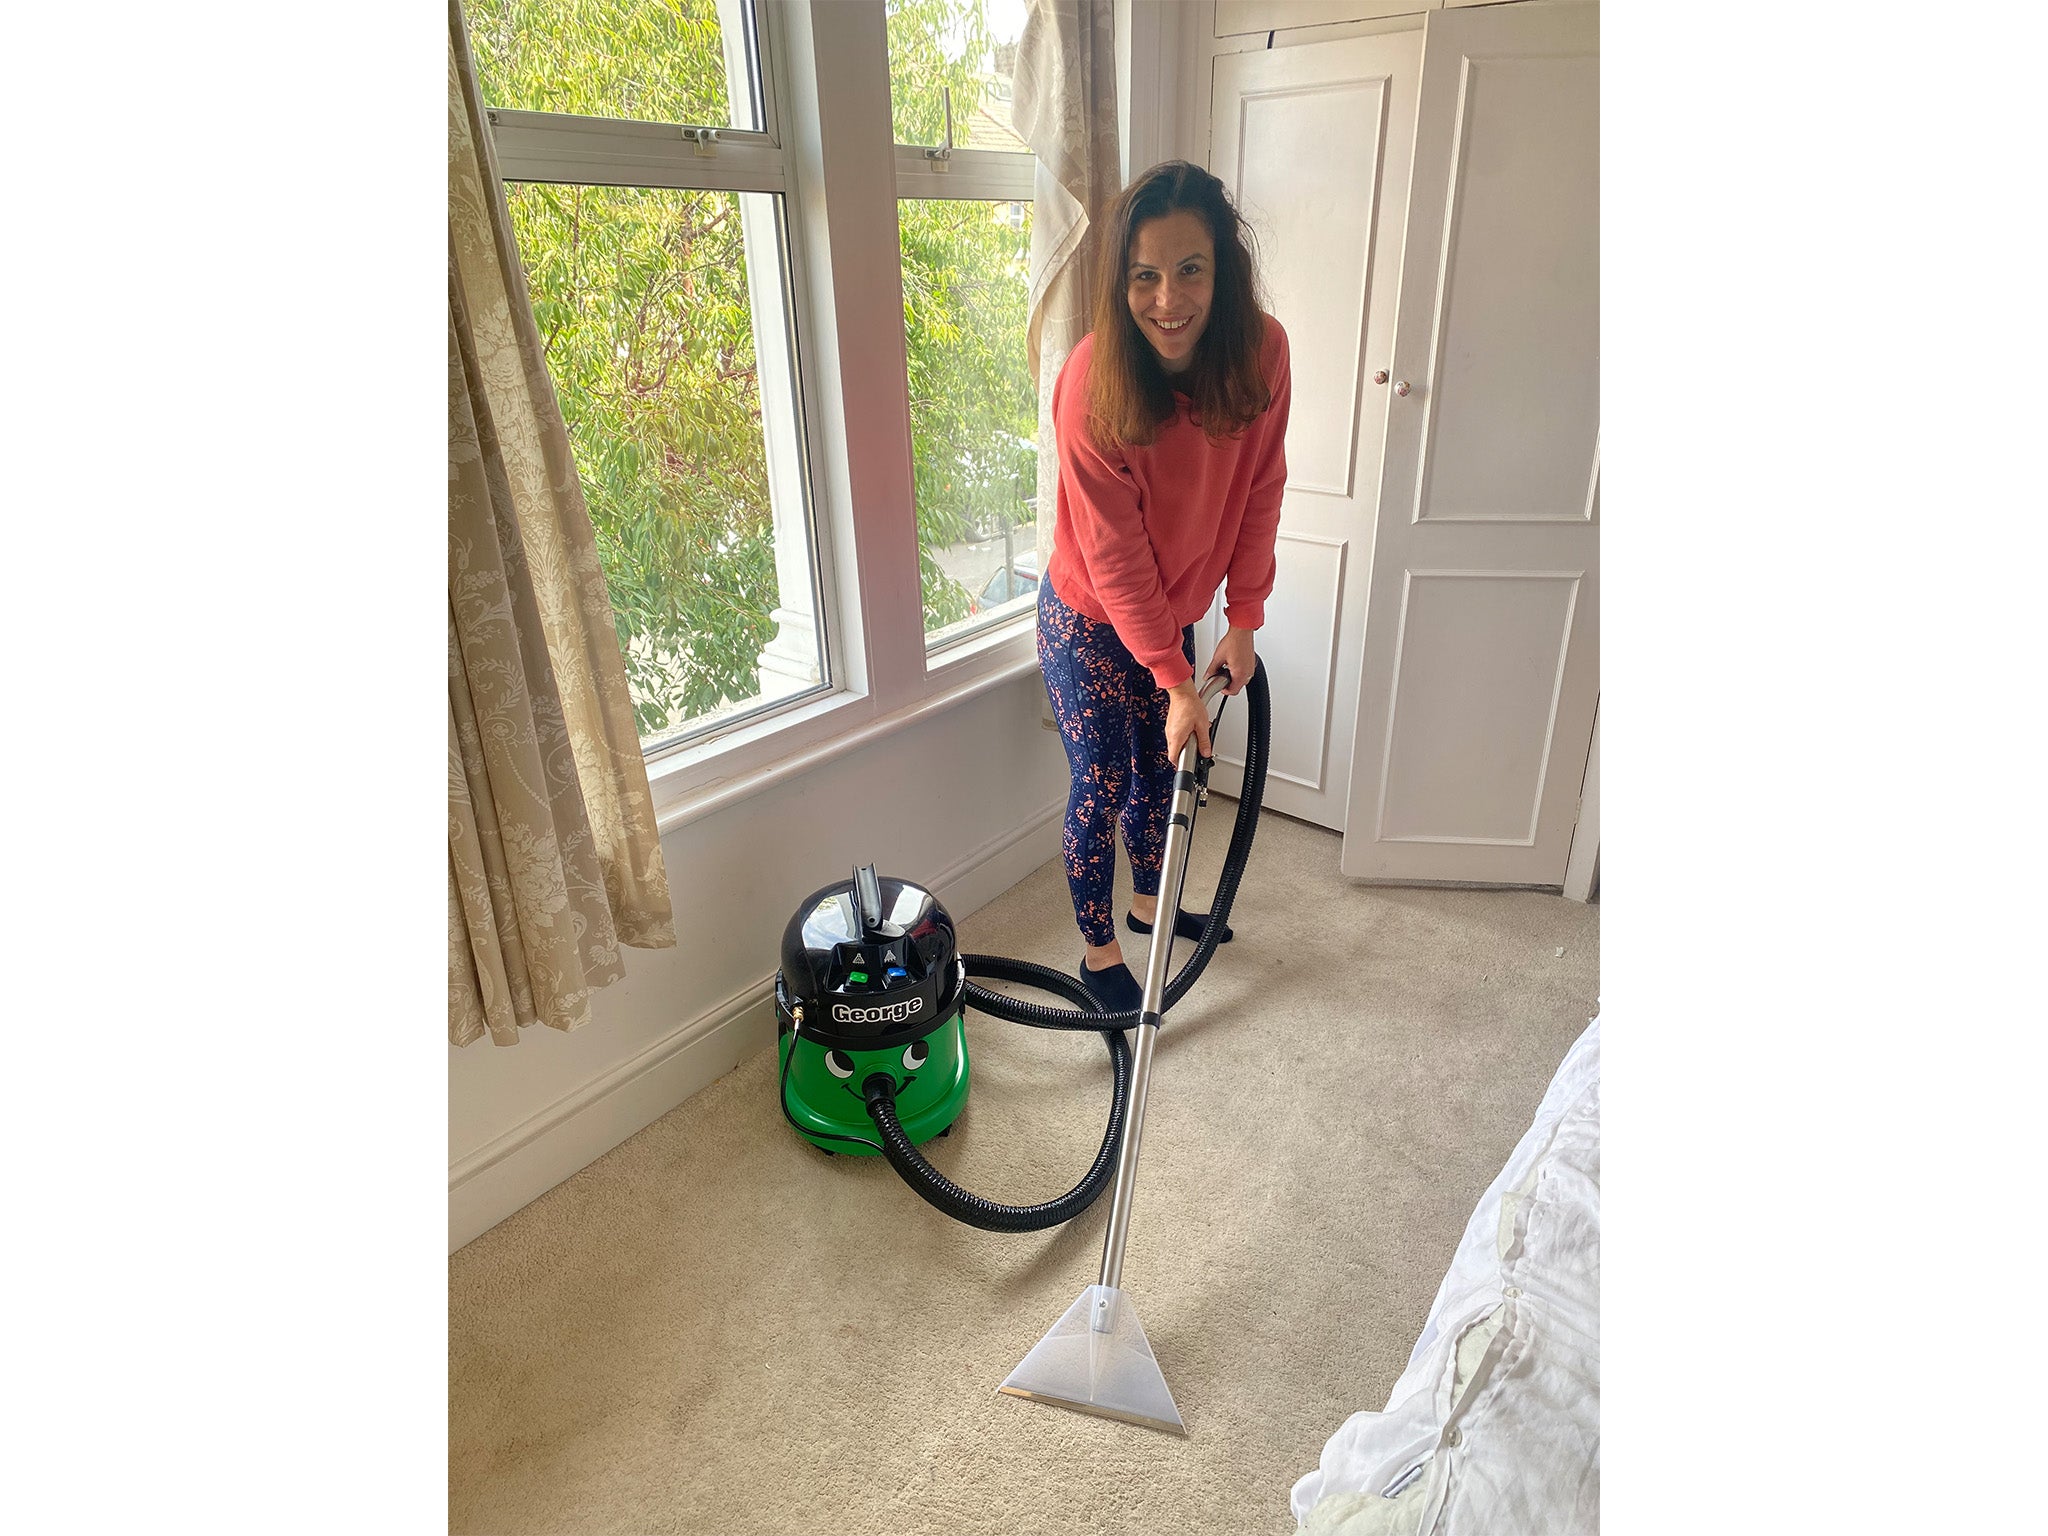 We put a range of carpet cleaners through their paces